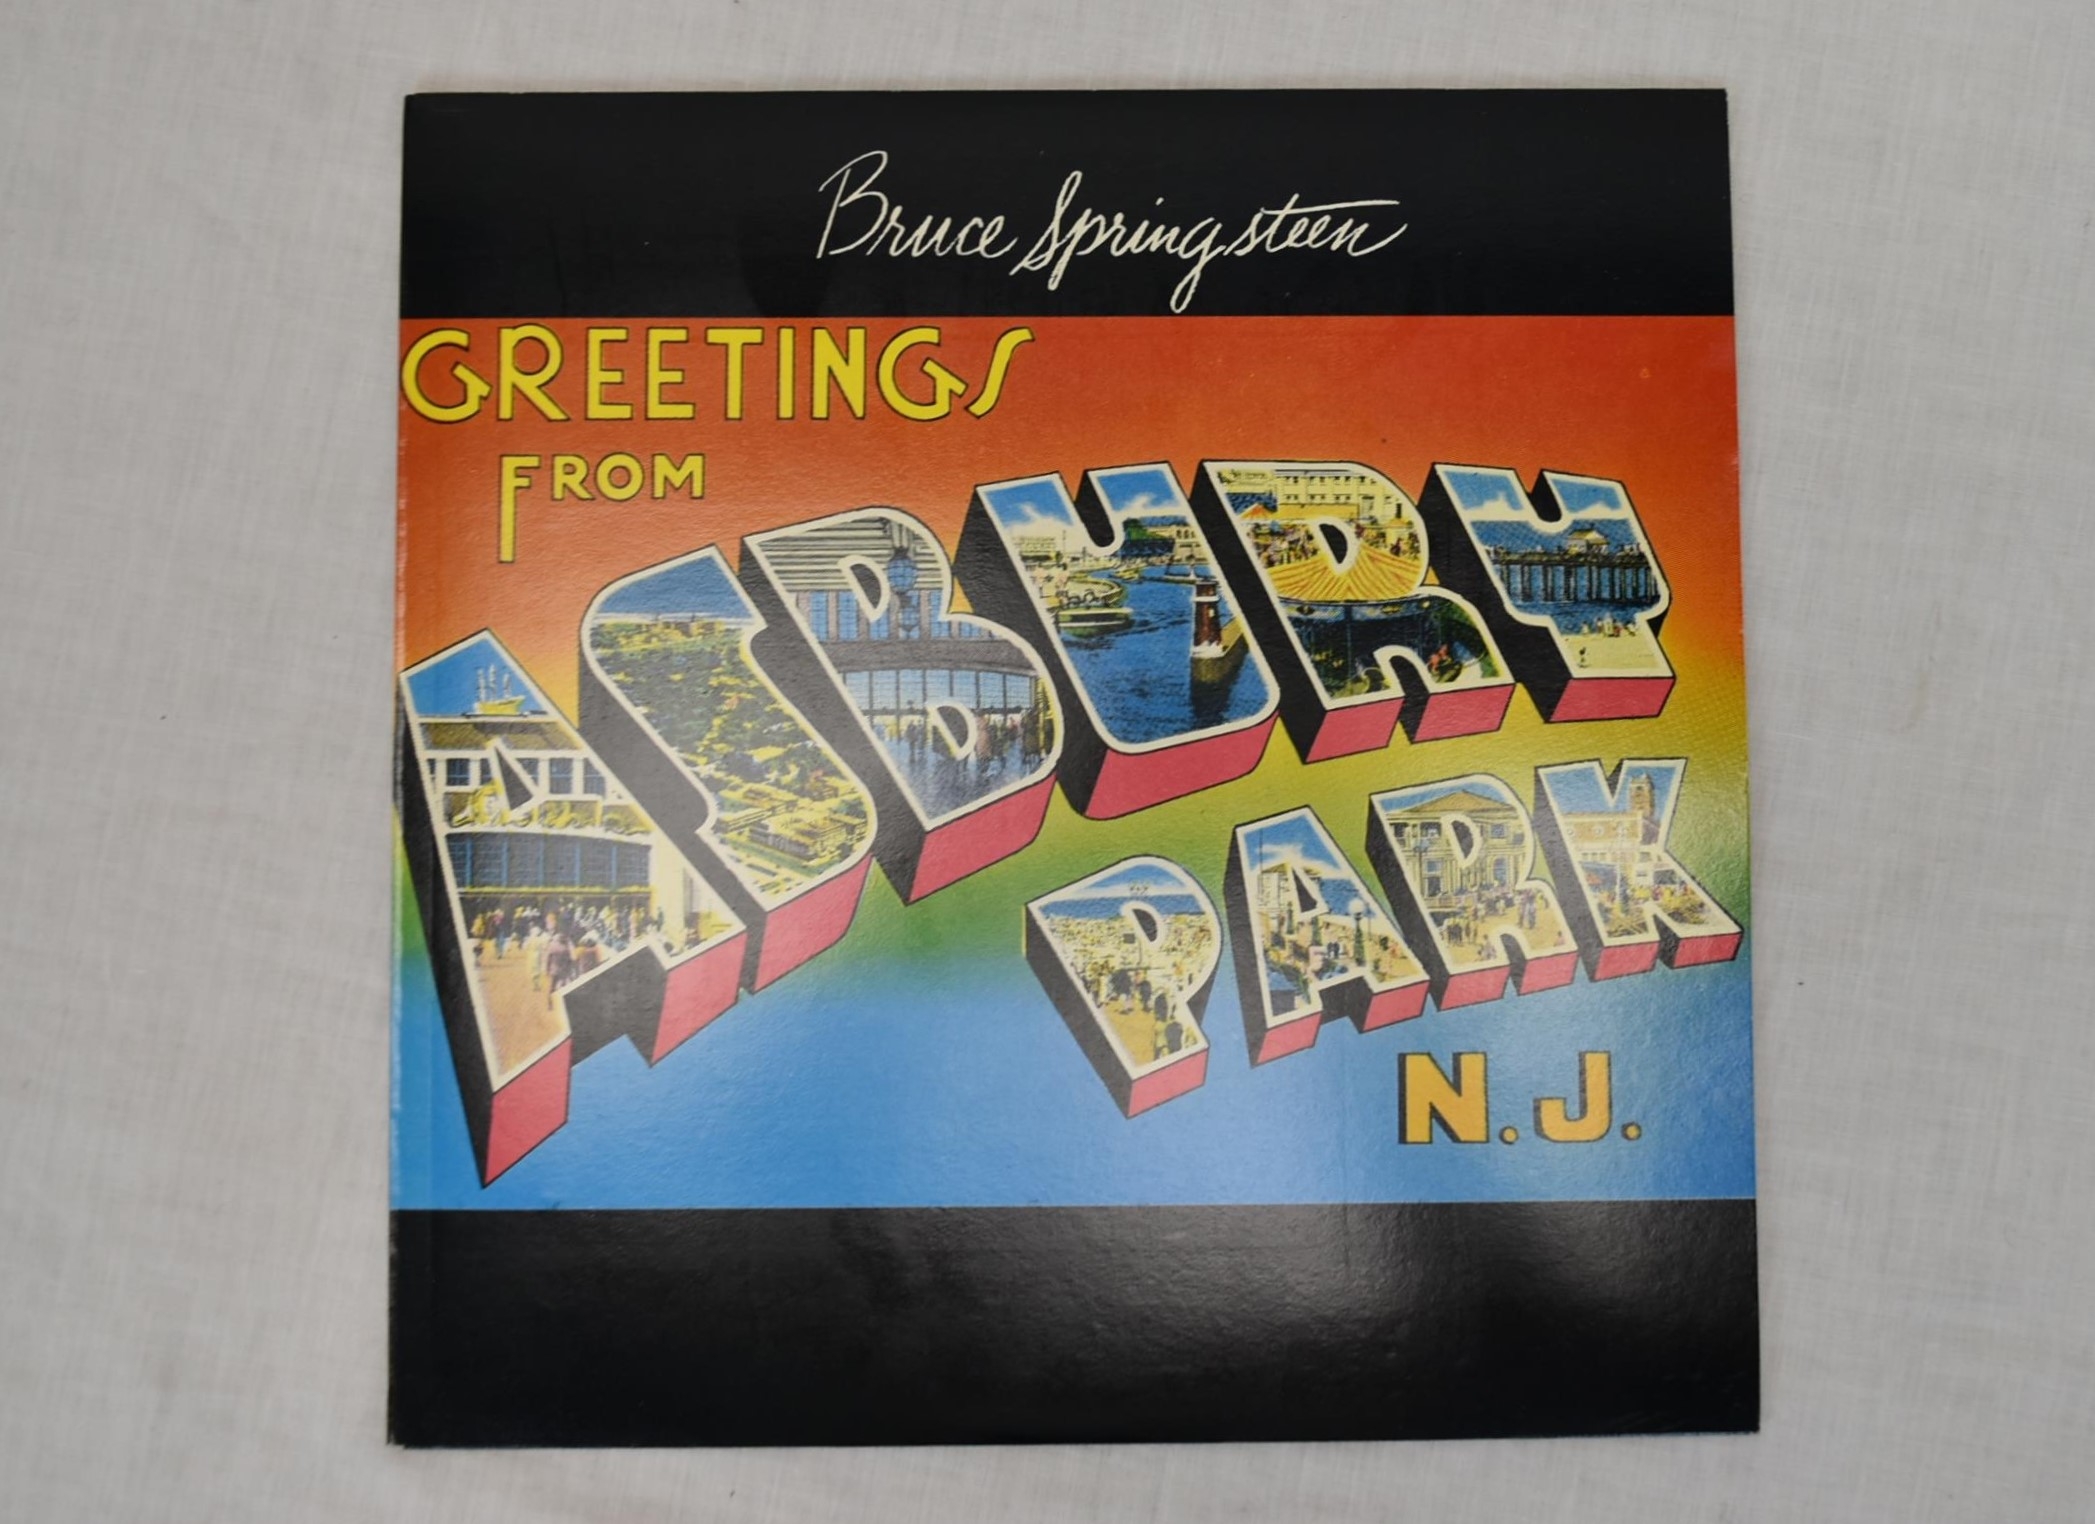 Records - Springsteen LP Box Set in VG condition. - Image 5 of 6